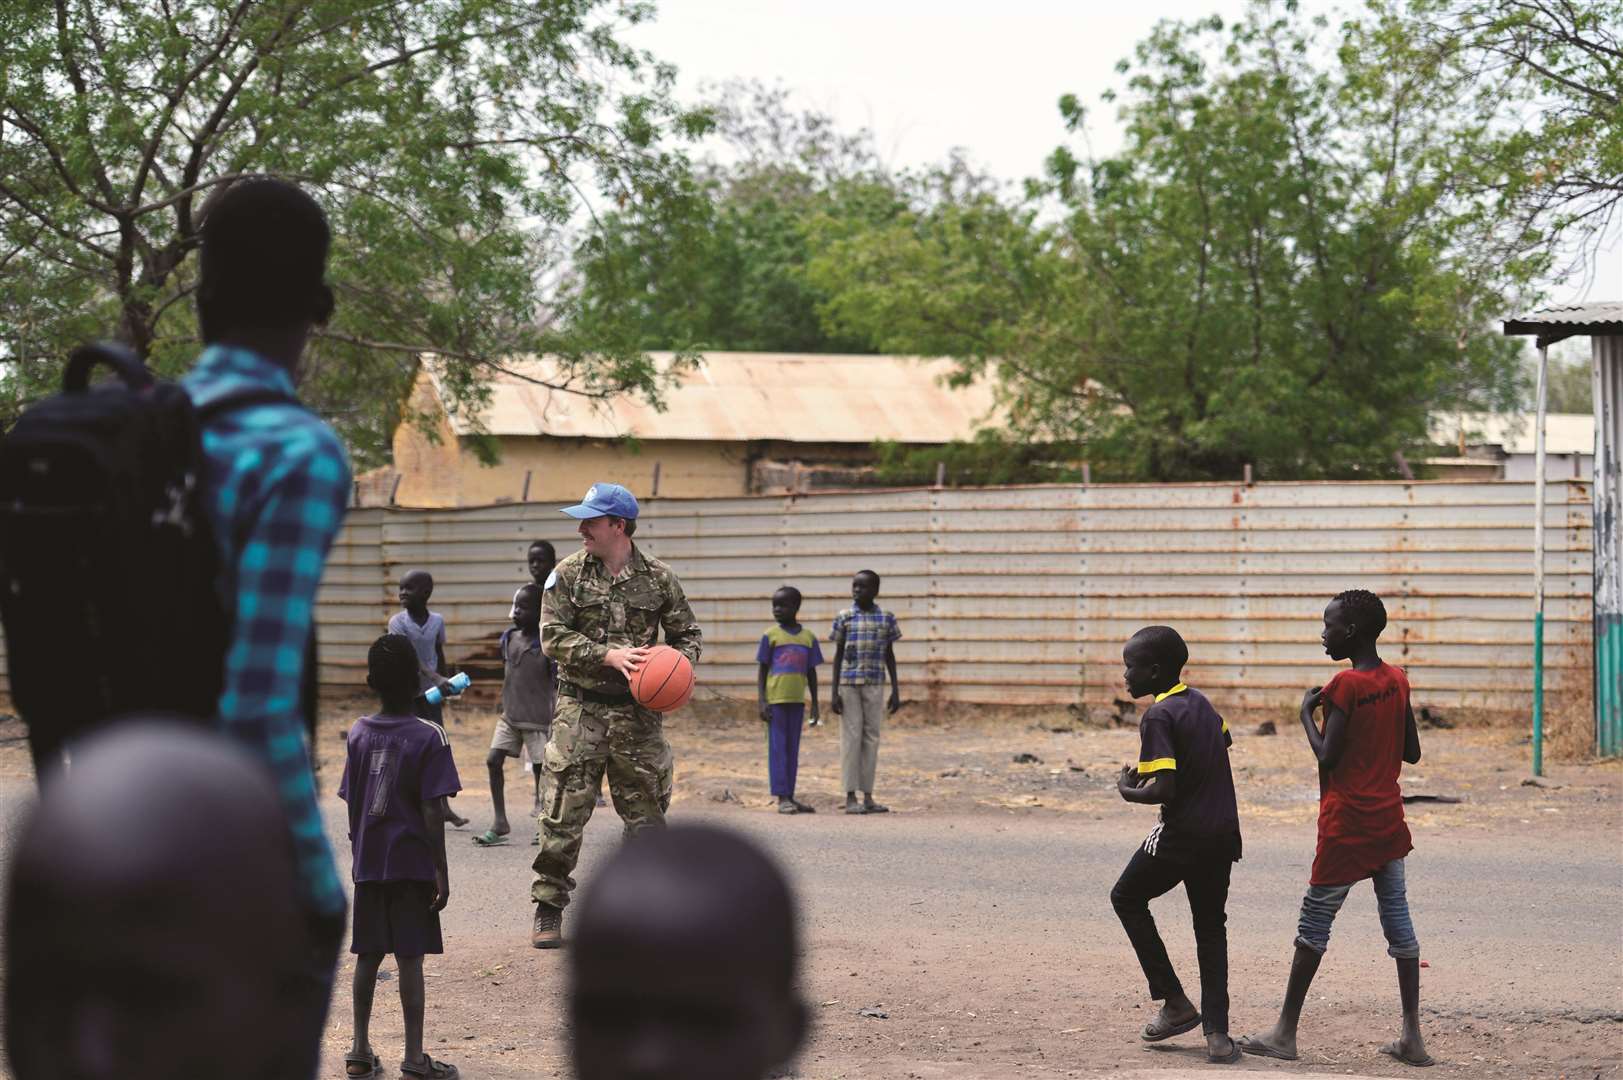 Captain Wearmouth playing with local children during the Civil Military vocational training.